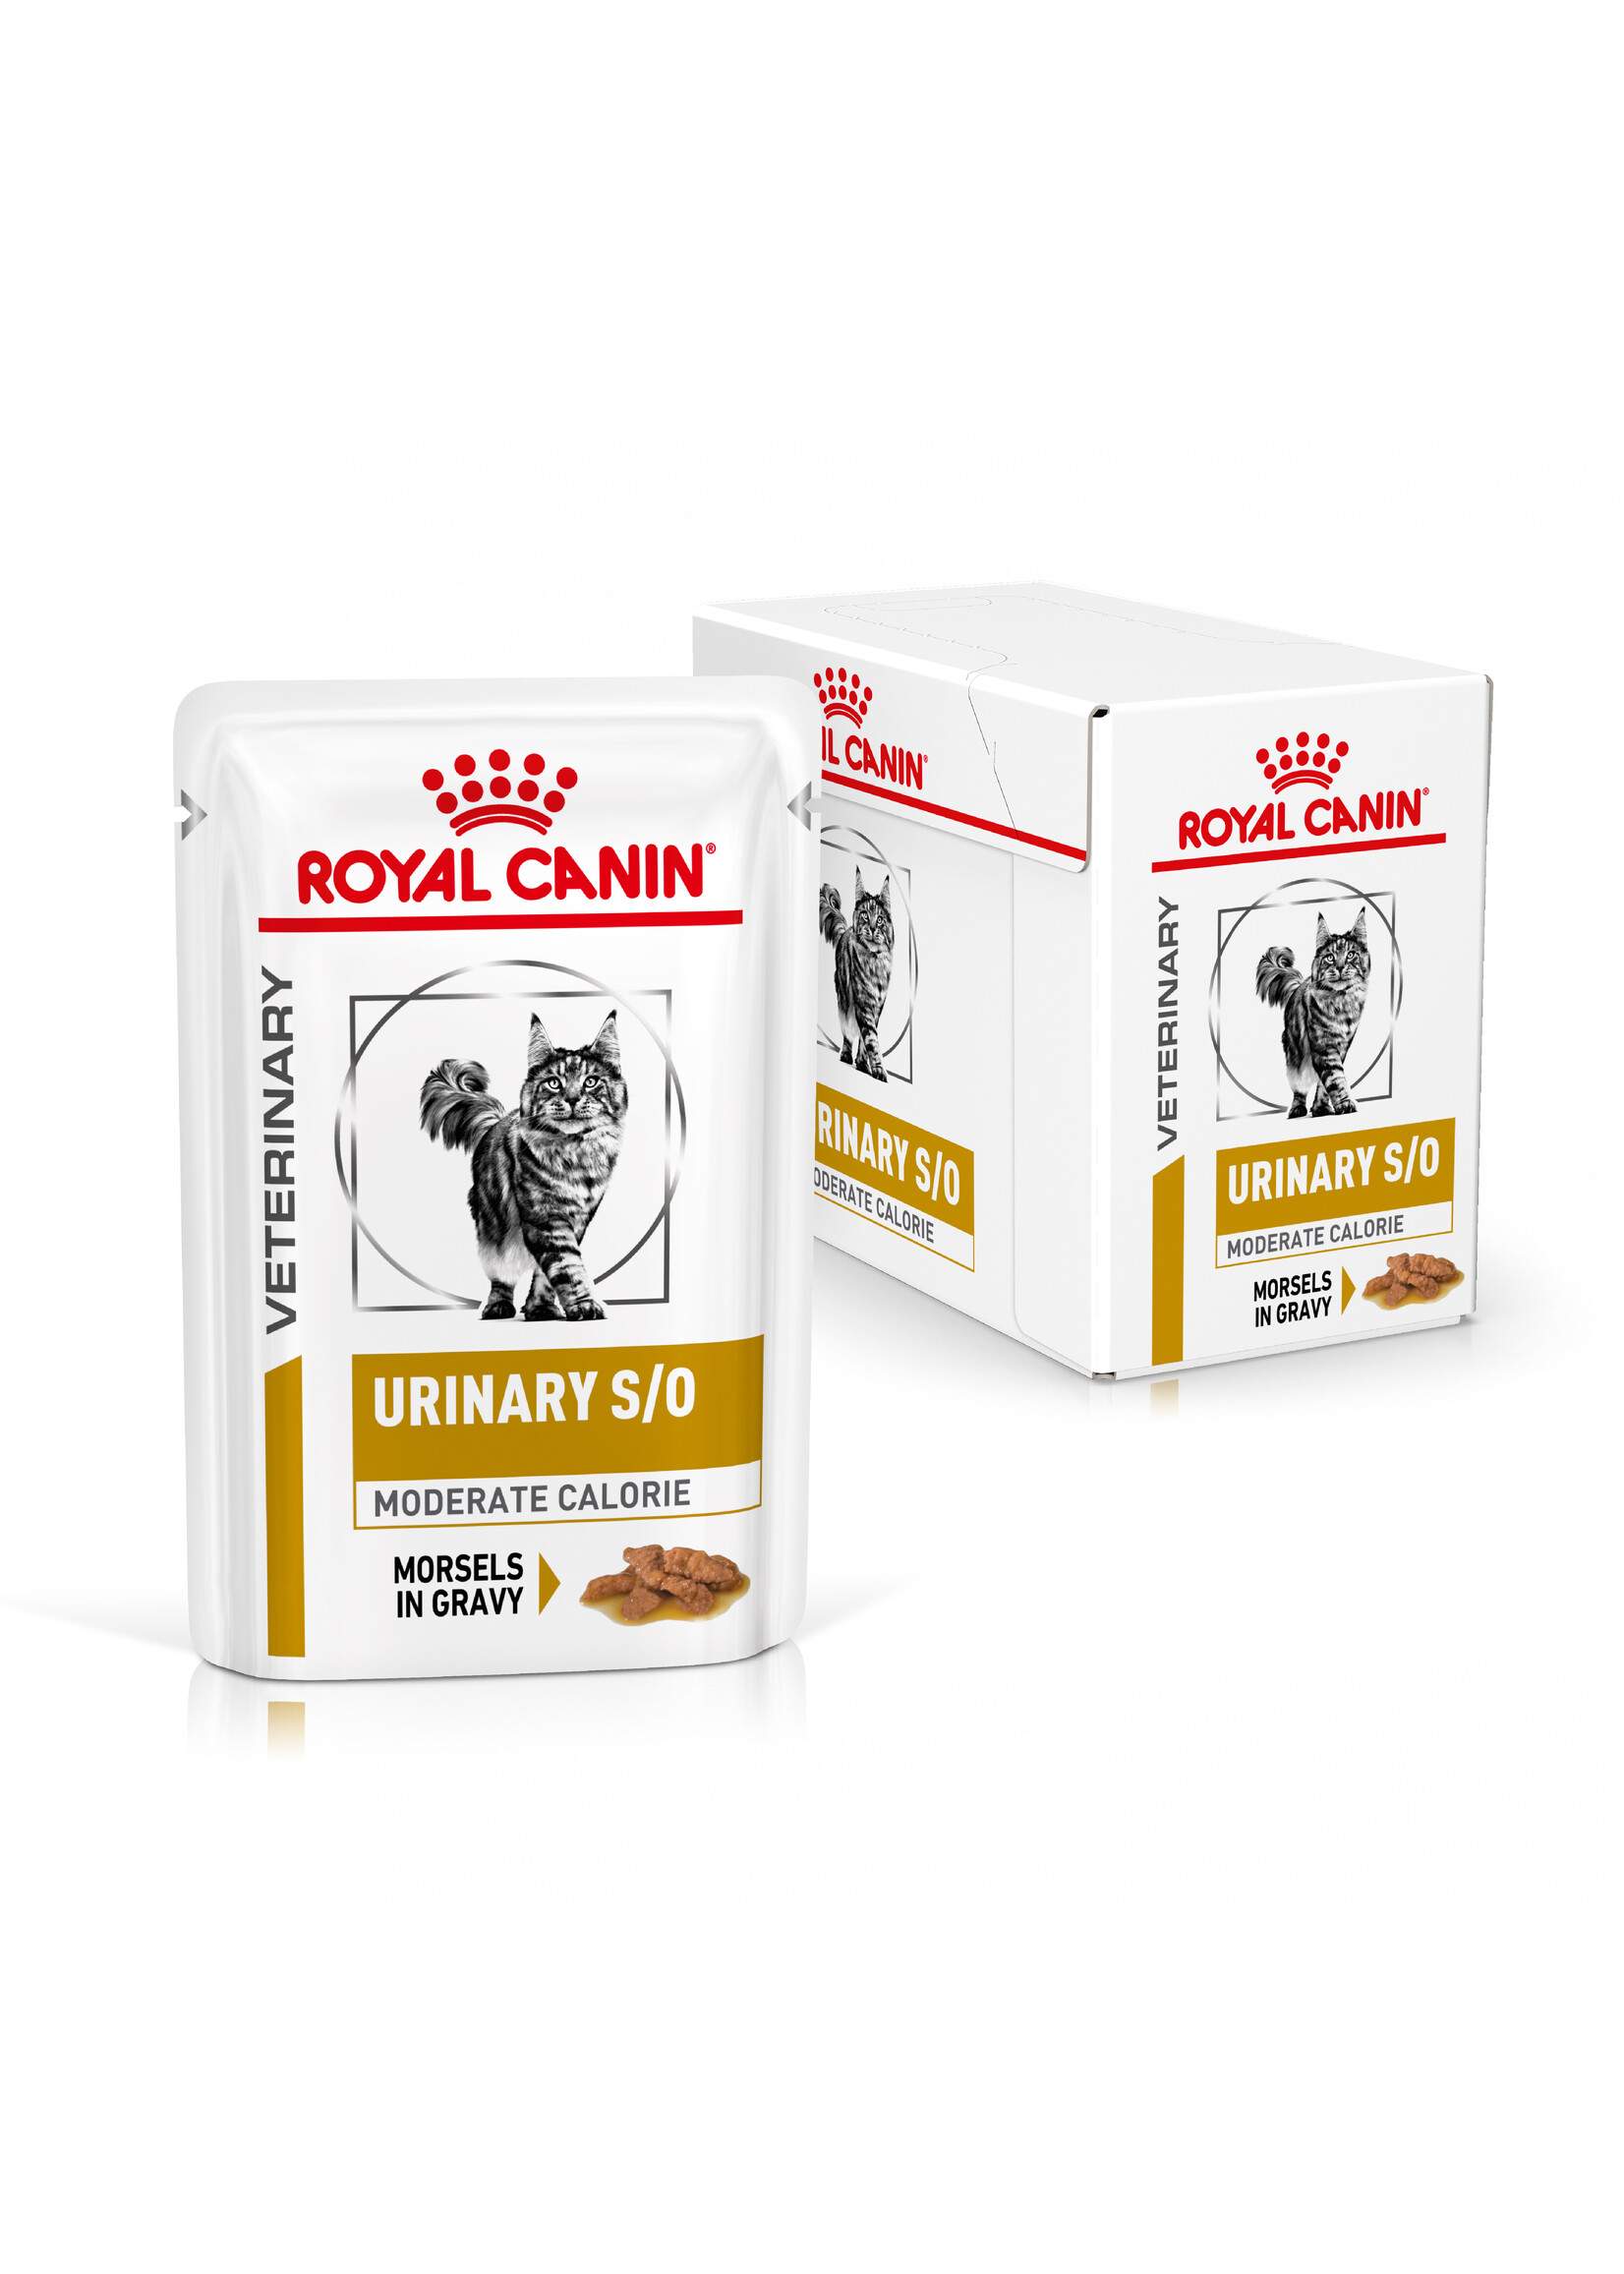 Royal Canin Royal Canin Urinary S/O Moderate Calorie Chat - Sachets